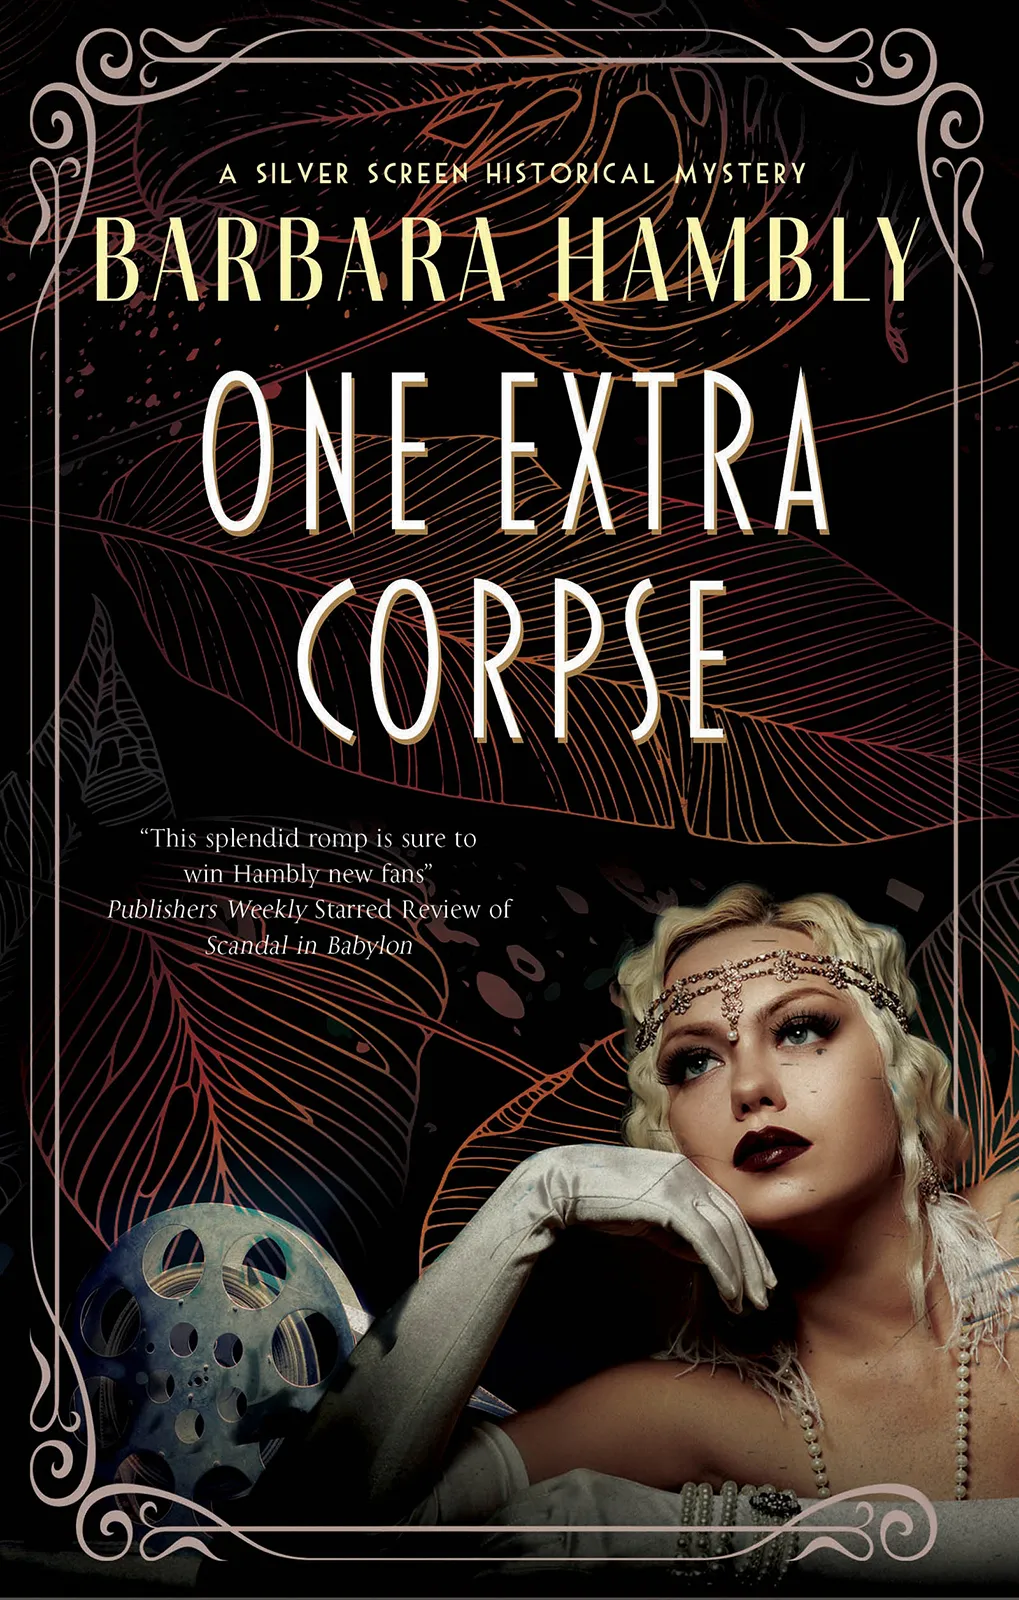 One Extra Corpse (Silver Screen Historical Mystery #2)